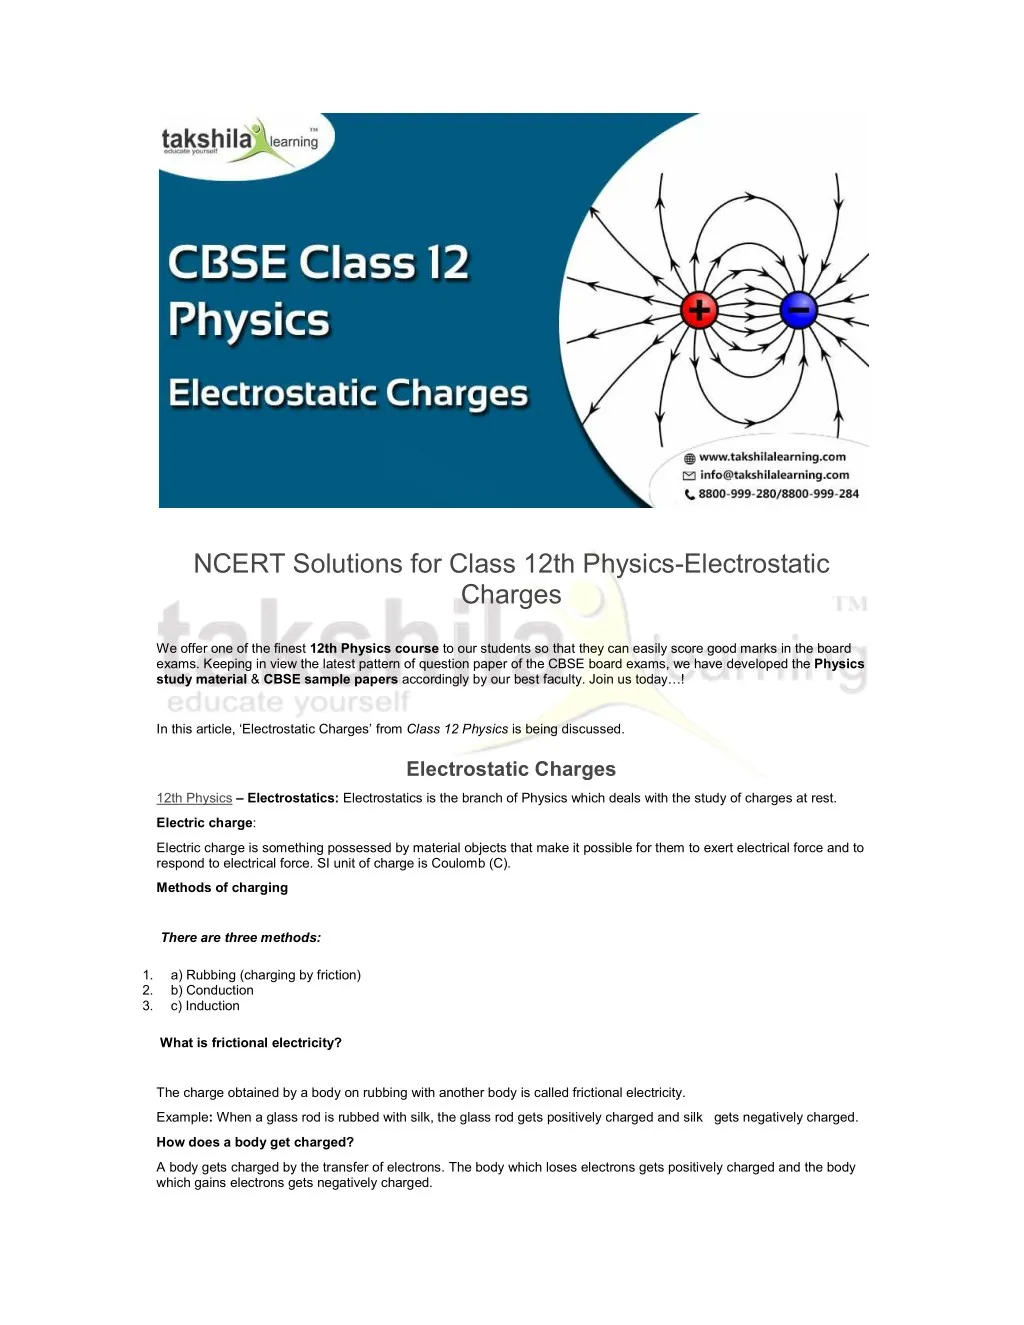 ncert solutions for class 12th physics